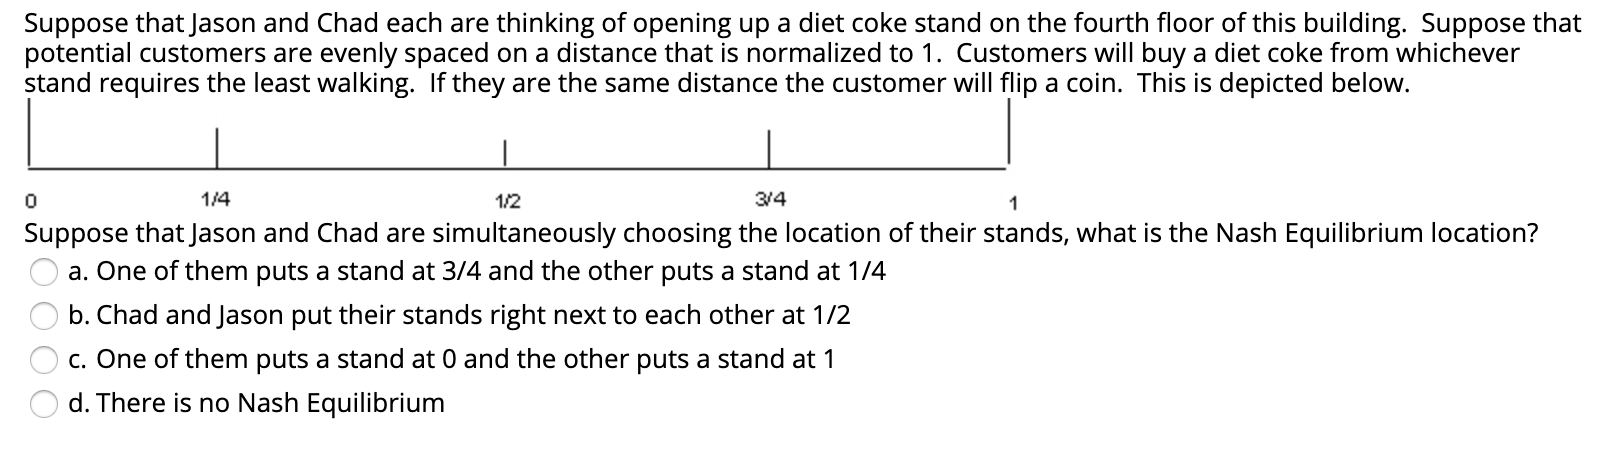 Suppose that Jason and Chad each are thinking of opening up a diet coke stand on the fourth floor of this building. Suppose that
potential customers are evenly spaced on a distance that is normalized to 1. Customers will buy a diet coke from whichever
stand requires the least walking. If they are the same distance the customer will flip a coin. This is depicted below.
1/4
1/2
3/4
Suppose that Jason and Chad are simultaneously choosing the location of their stands, what is the Nash Equilibrium location?
a. One of them puts a stand at 3/4 and the other puts a stand at 1/4
b. Chad and Jason put their stands right next to each other at 1/2
c. One of them puts a stand at 0 and the other puts a stand at 1
d. There is no Nash Equilibrium
